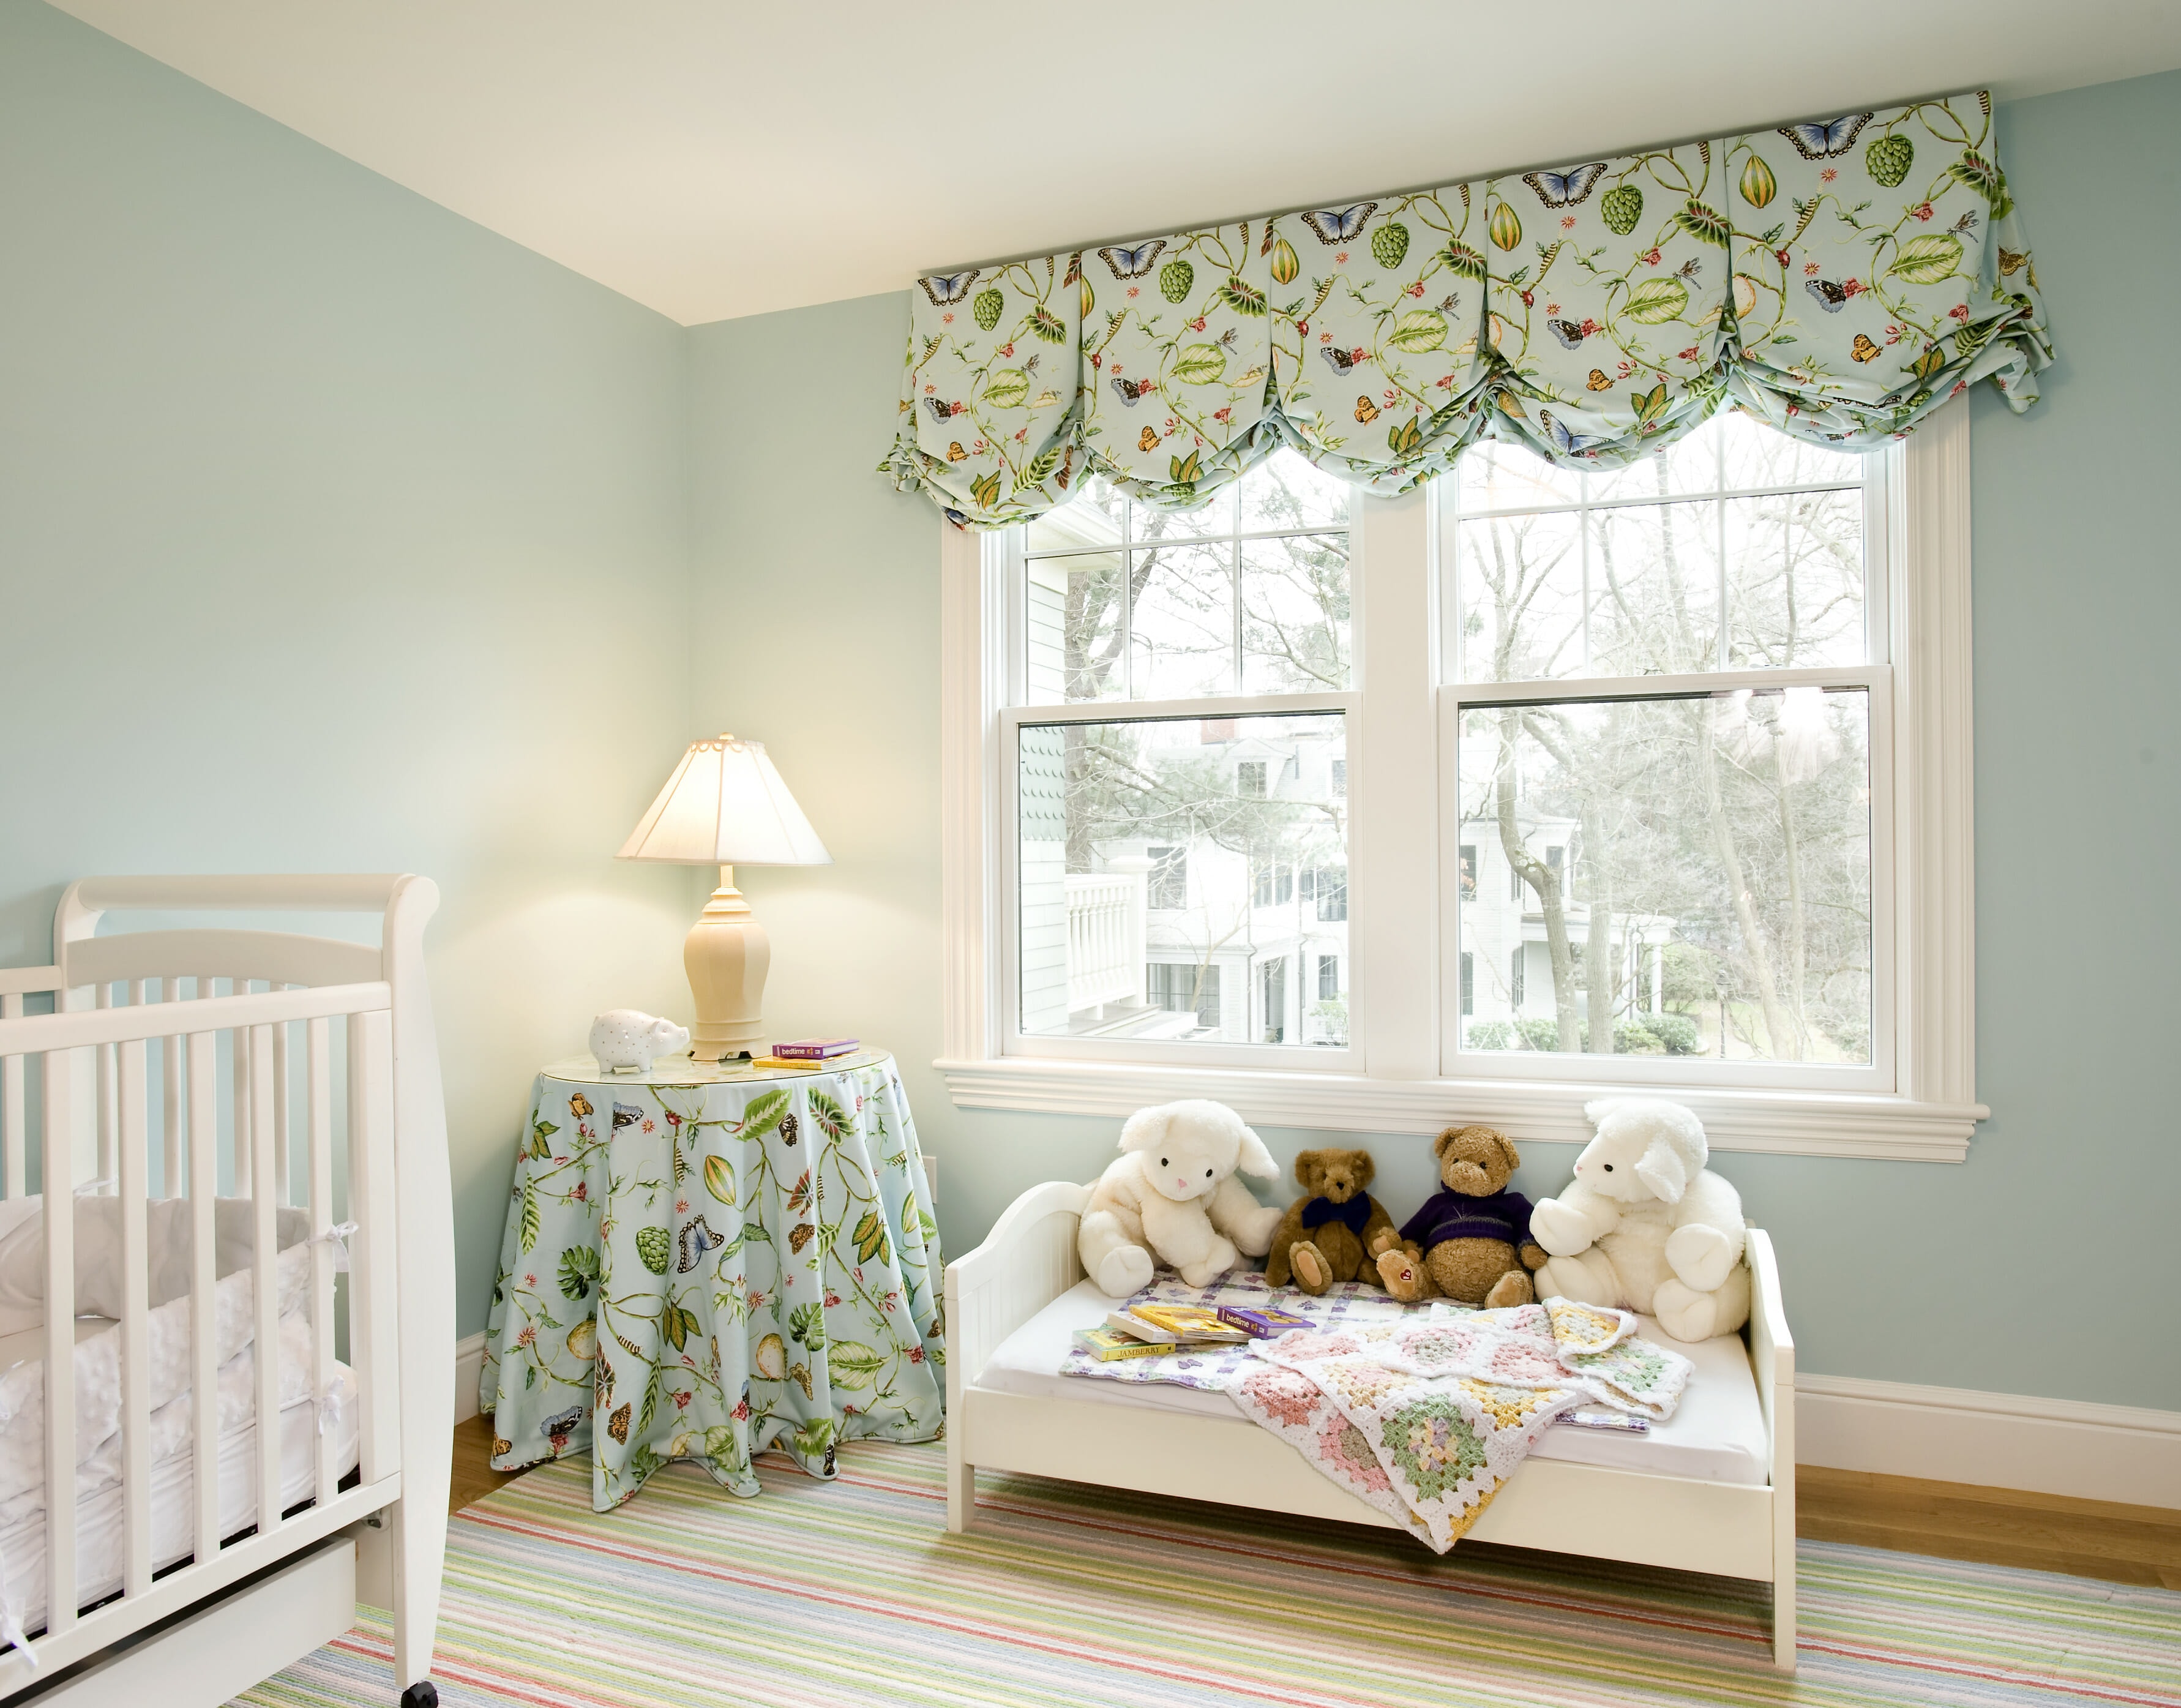 Cornice Box or Valance for the Bedroom?